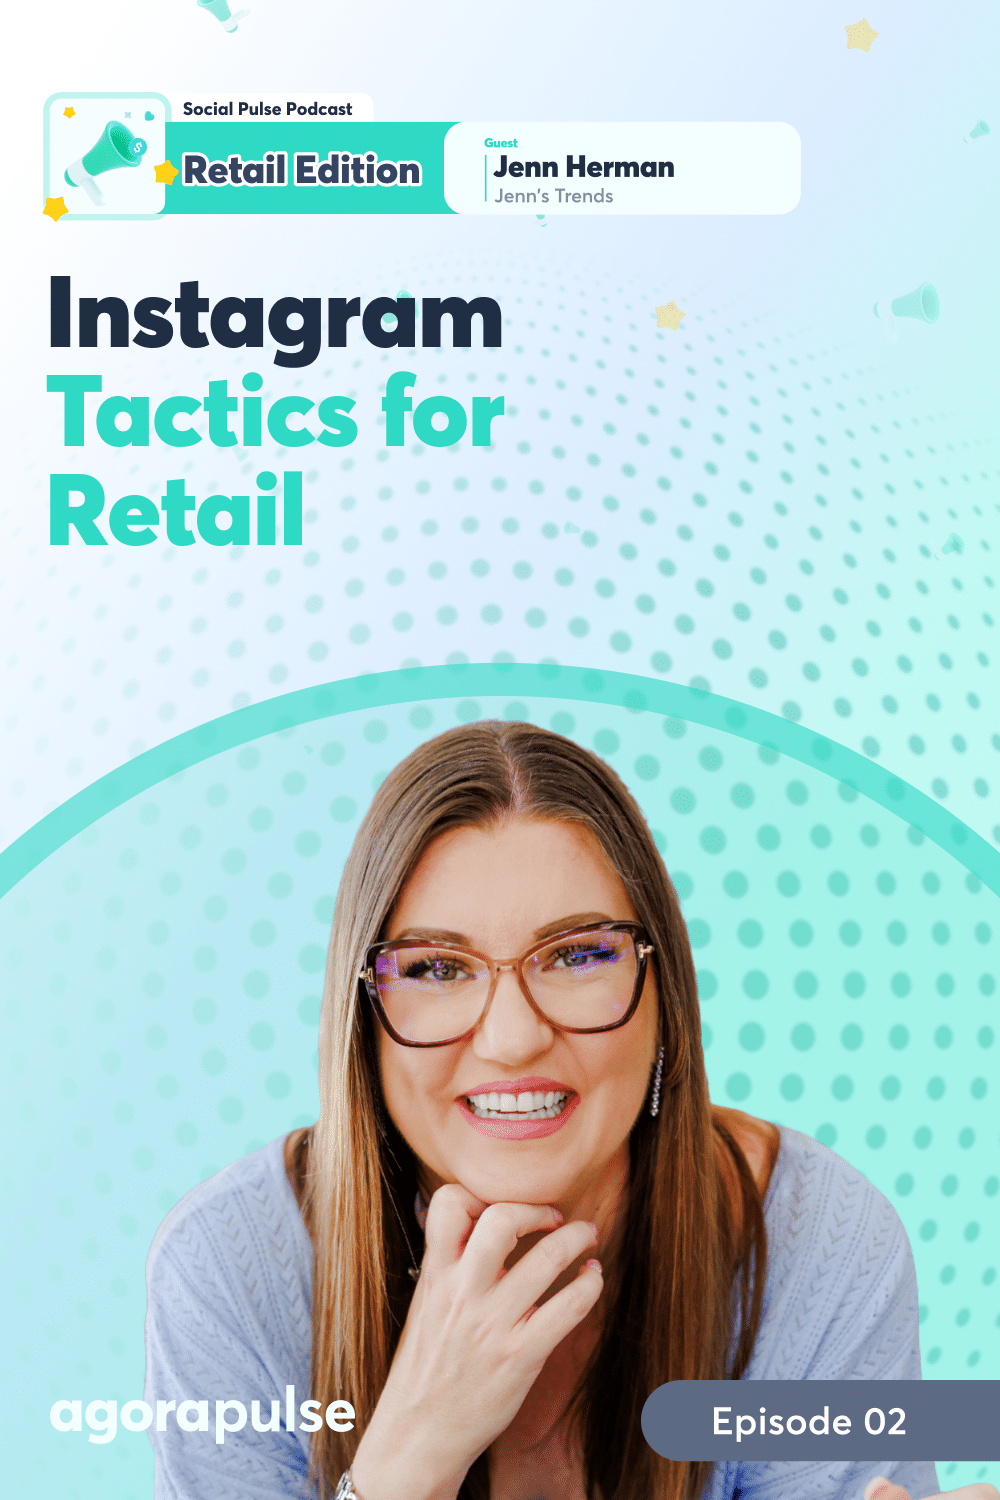 How to Use Instagram Tactics for Retail [Podcast & Recap]